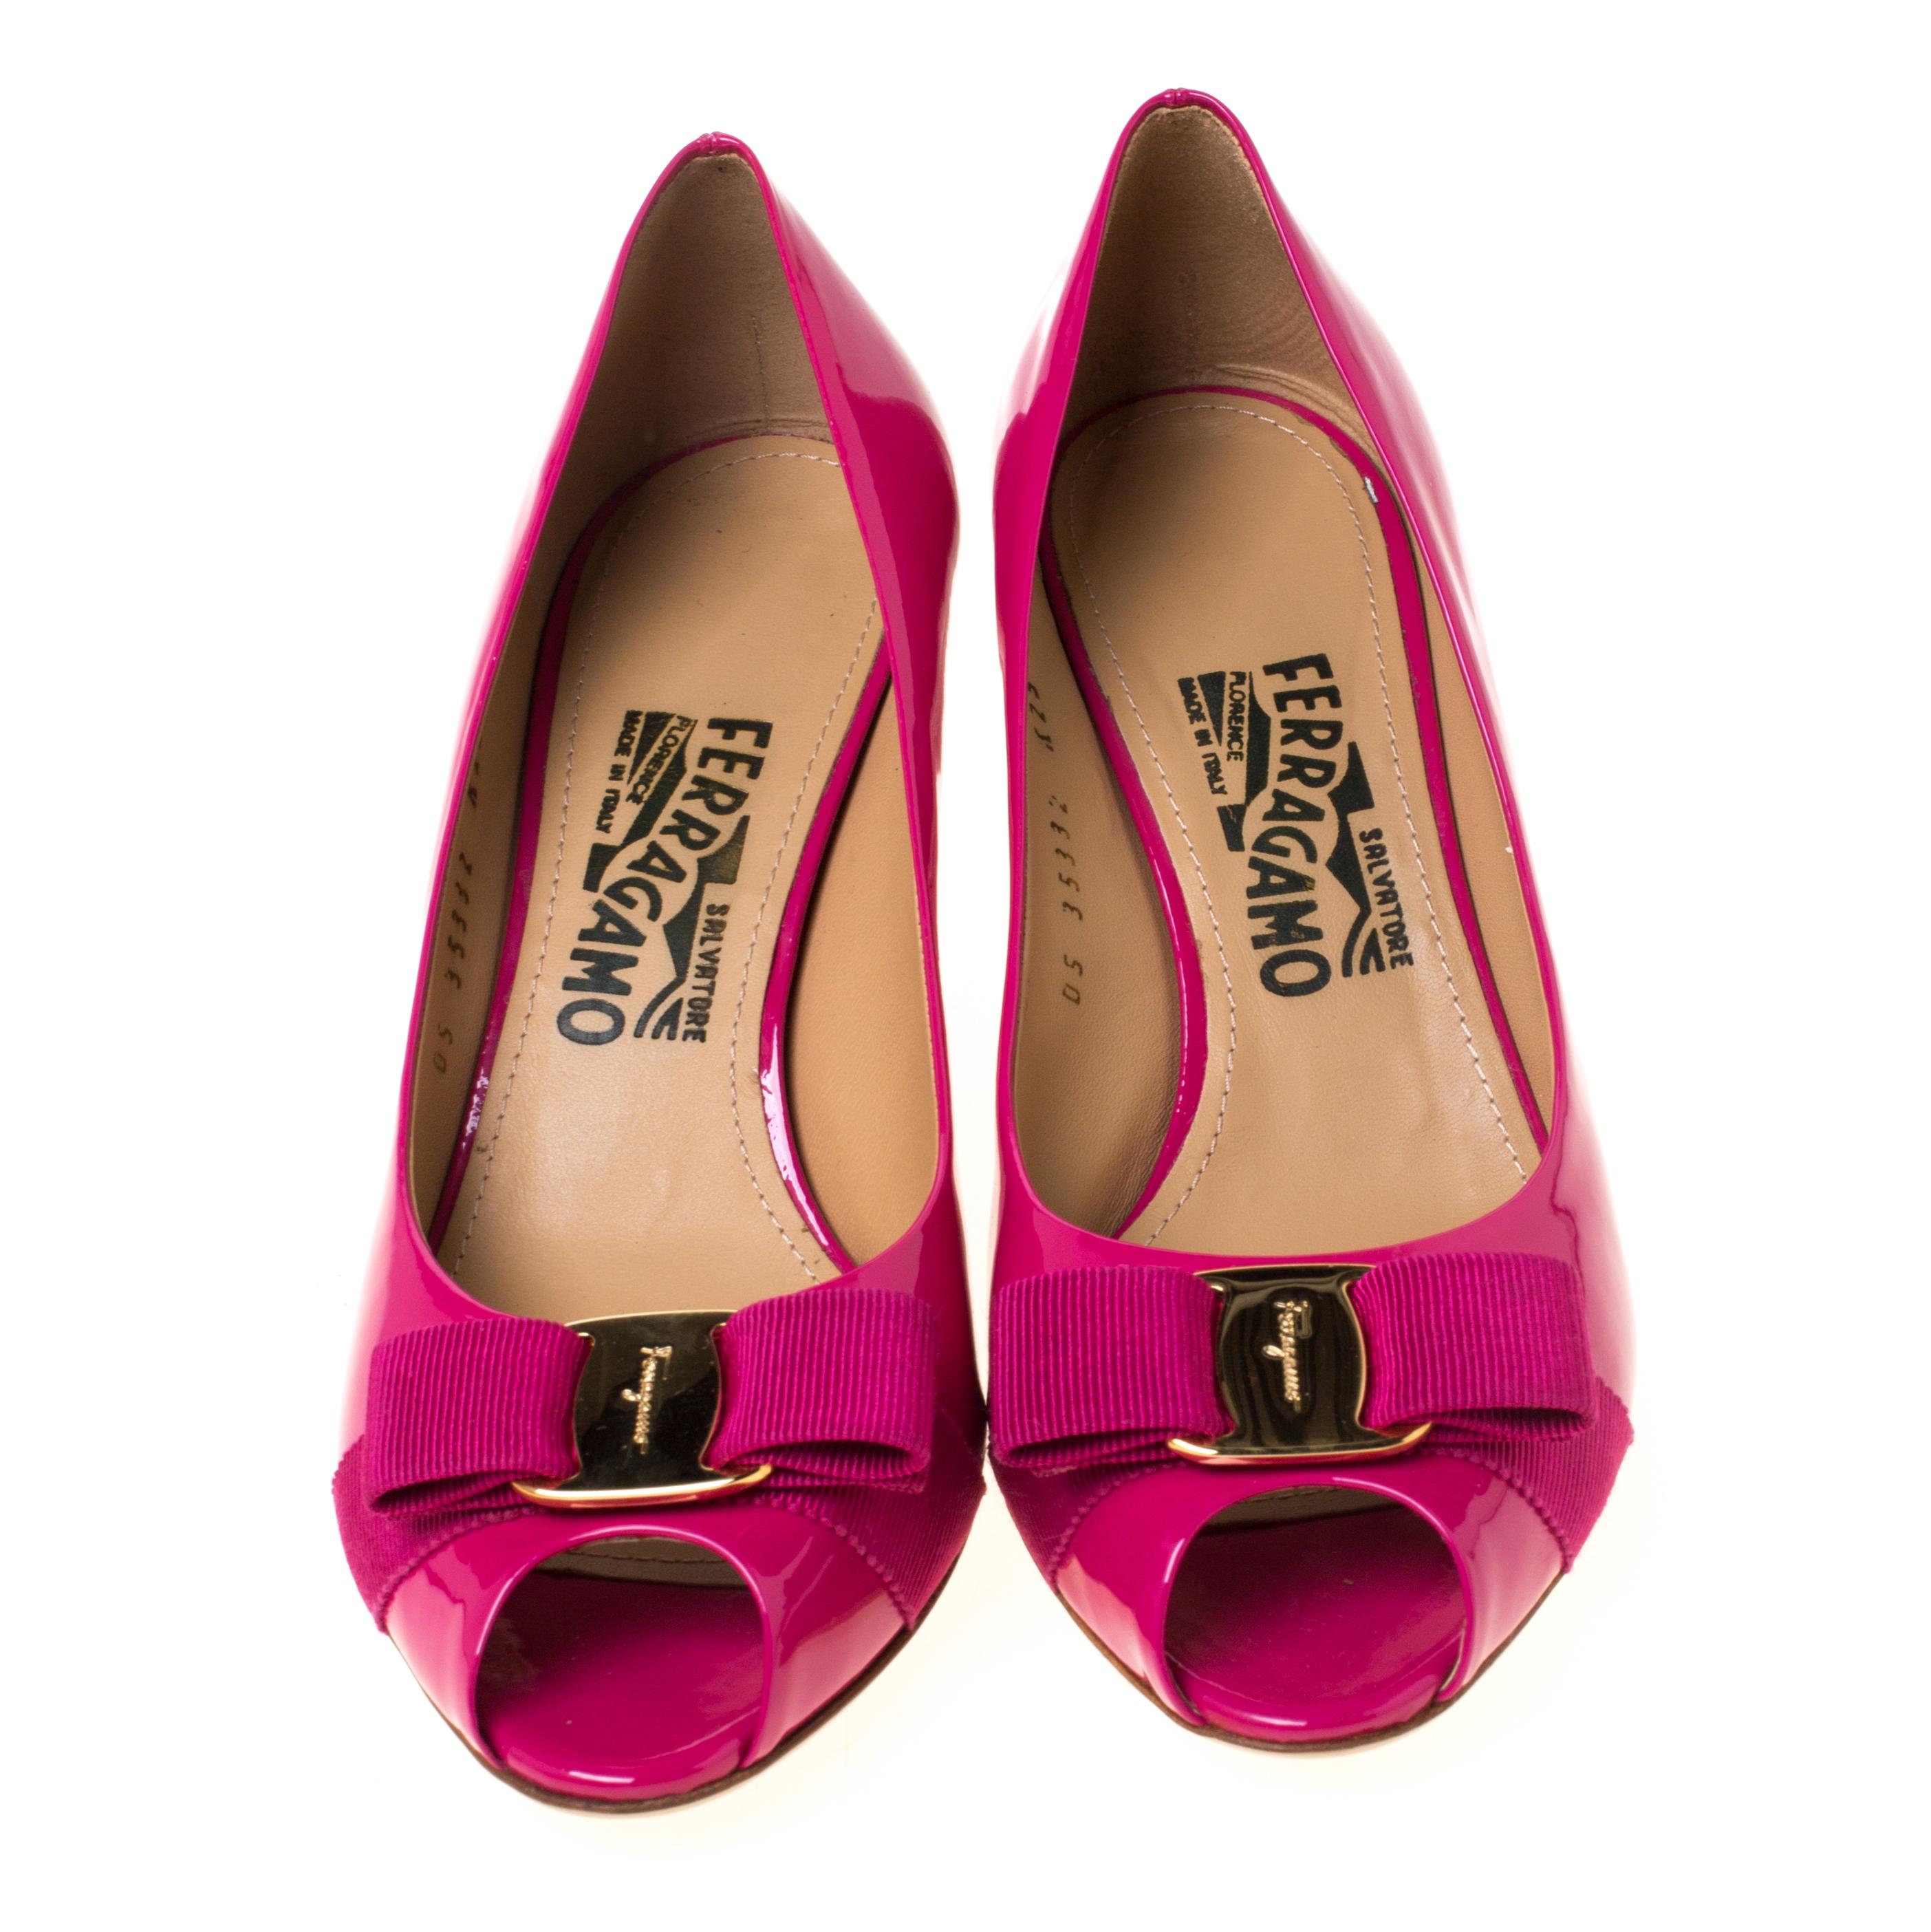 Elevate your dressing with these ‘Sissi’ wedge pumps from Salvatore Ferragamo. In an alluring peep-toe silhouette; this pair is crafted from magenta patent leather and designed with signature bows, peep-toes and wedge heels.

Includes: Original Box

